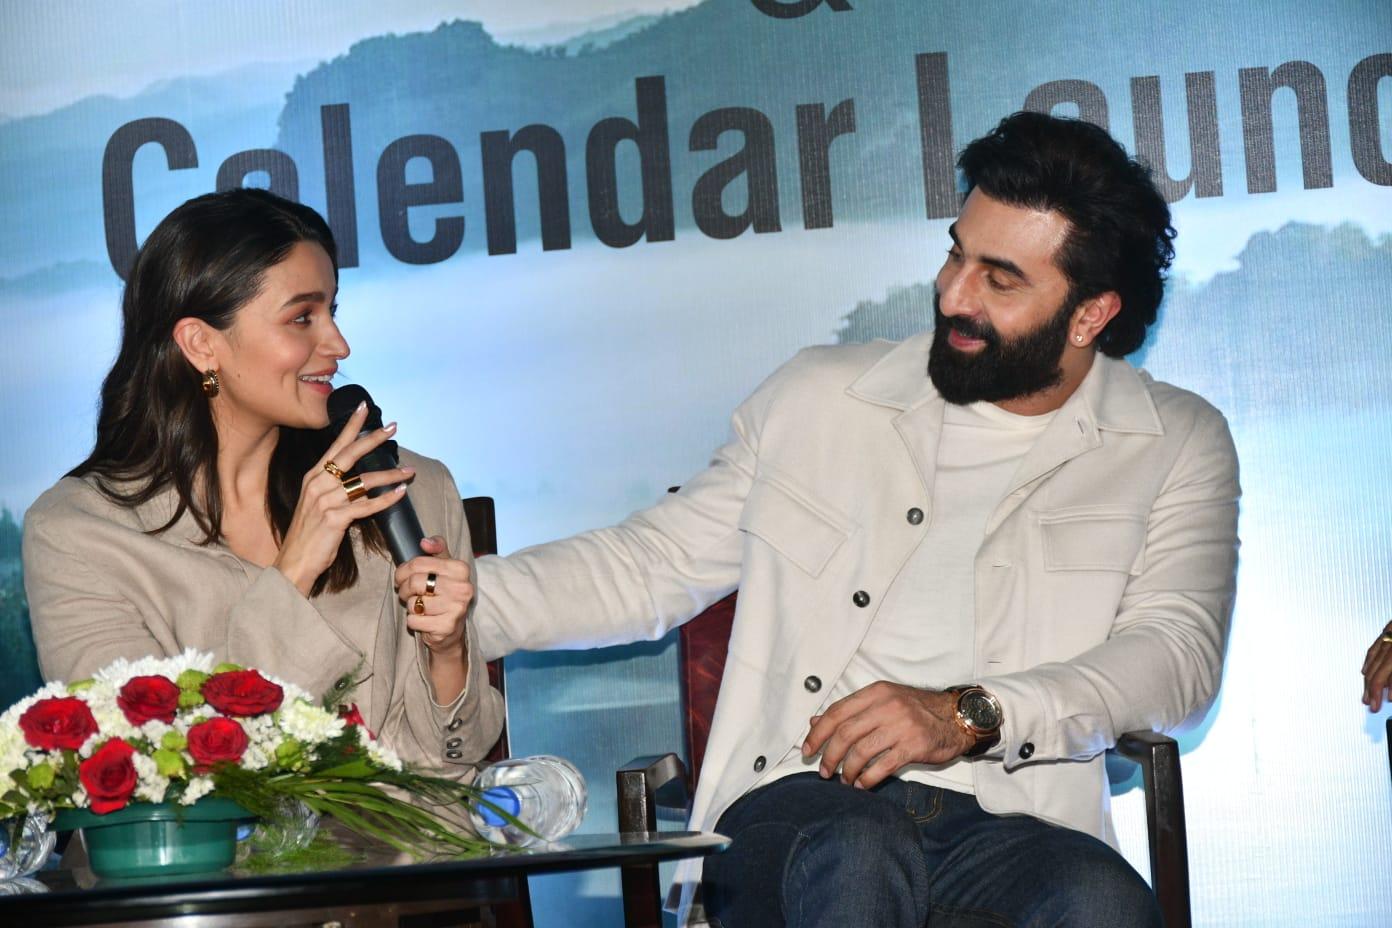 At the launch, the two actors also spoke to the audience. Alia also sang the hit song 'Kesariya' from the film Brahmastra that was released last year